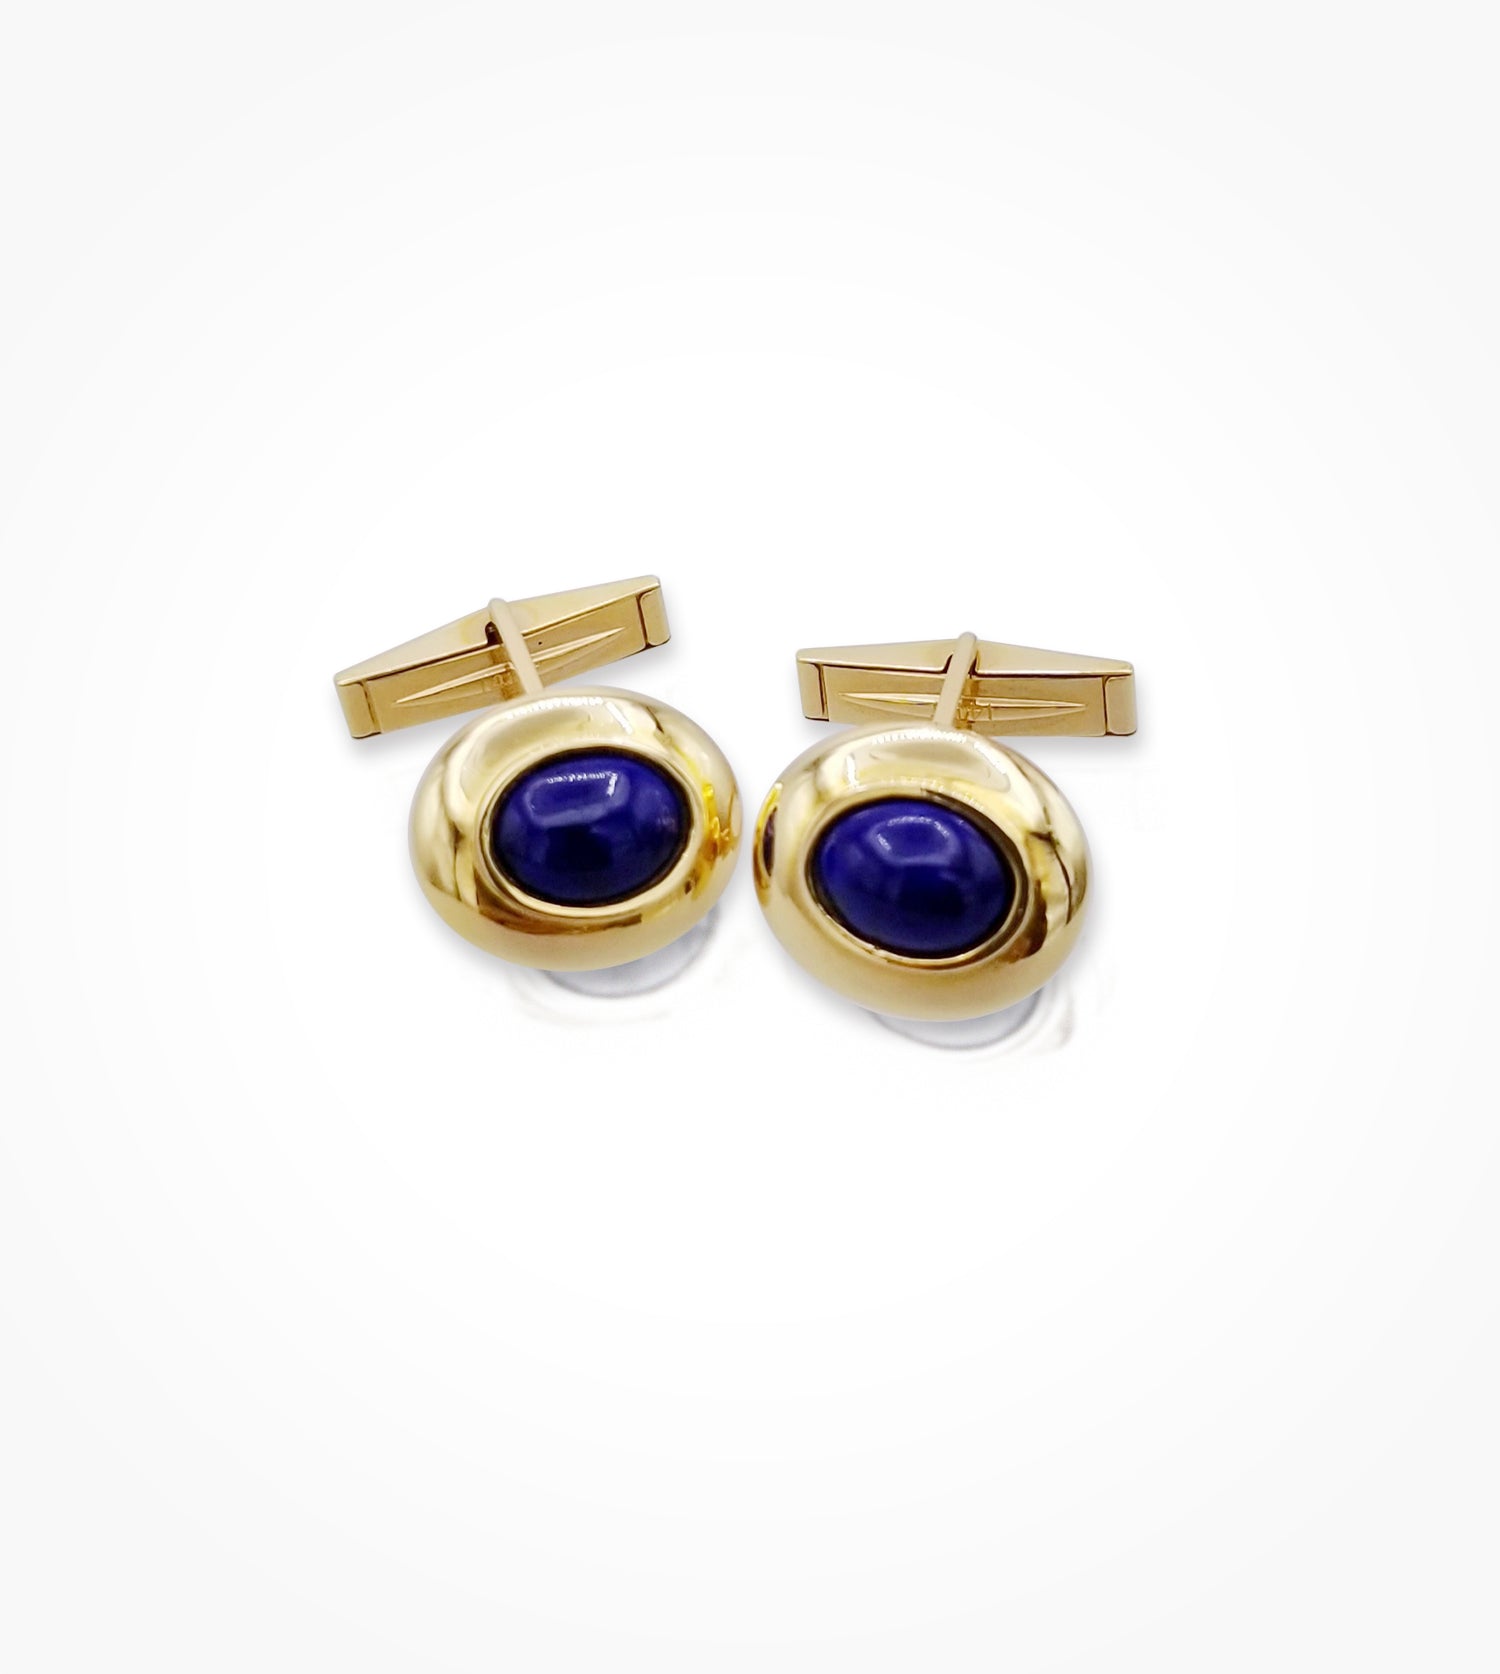 IS-003290-14kt yellow gold oval lapis cabochon Cufflinks